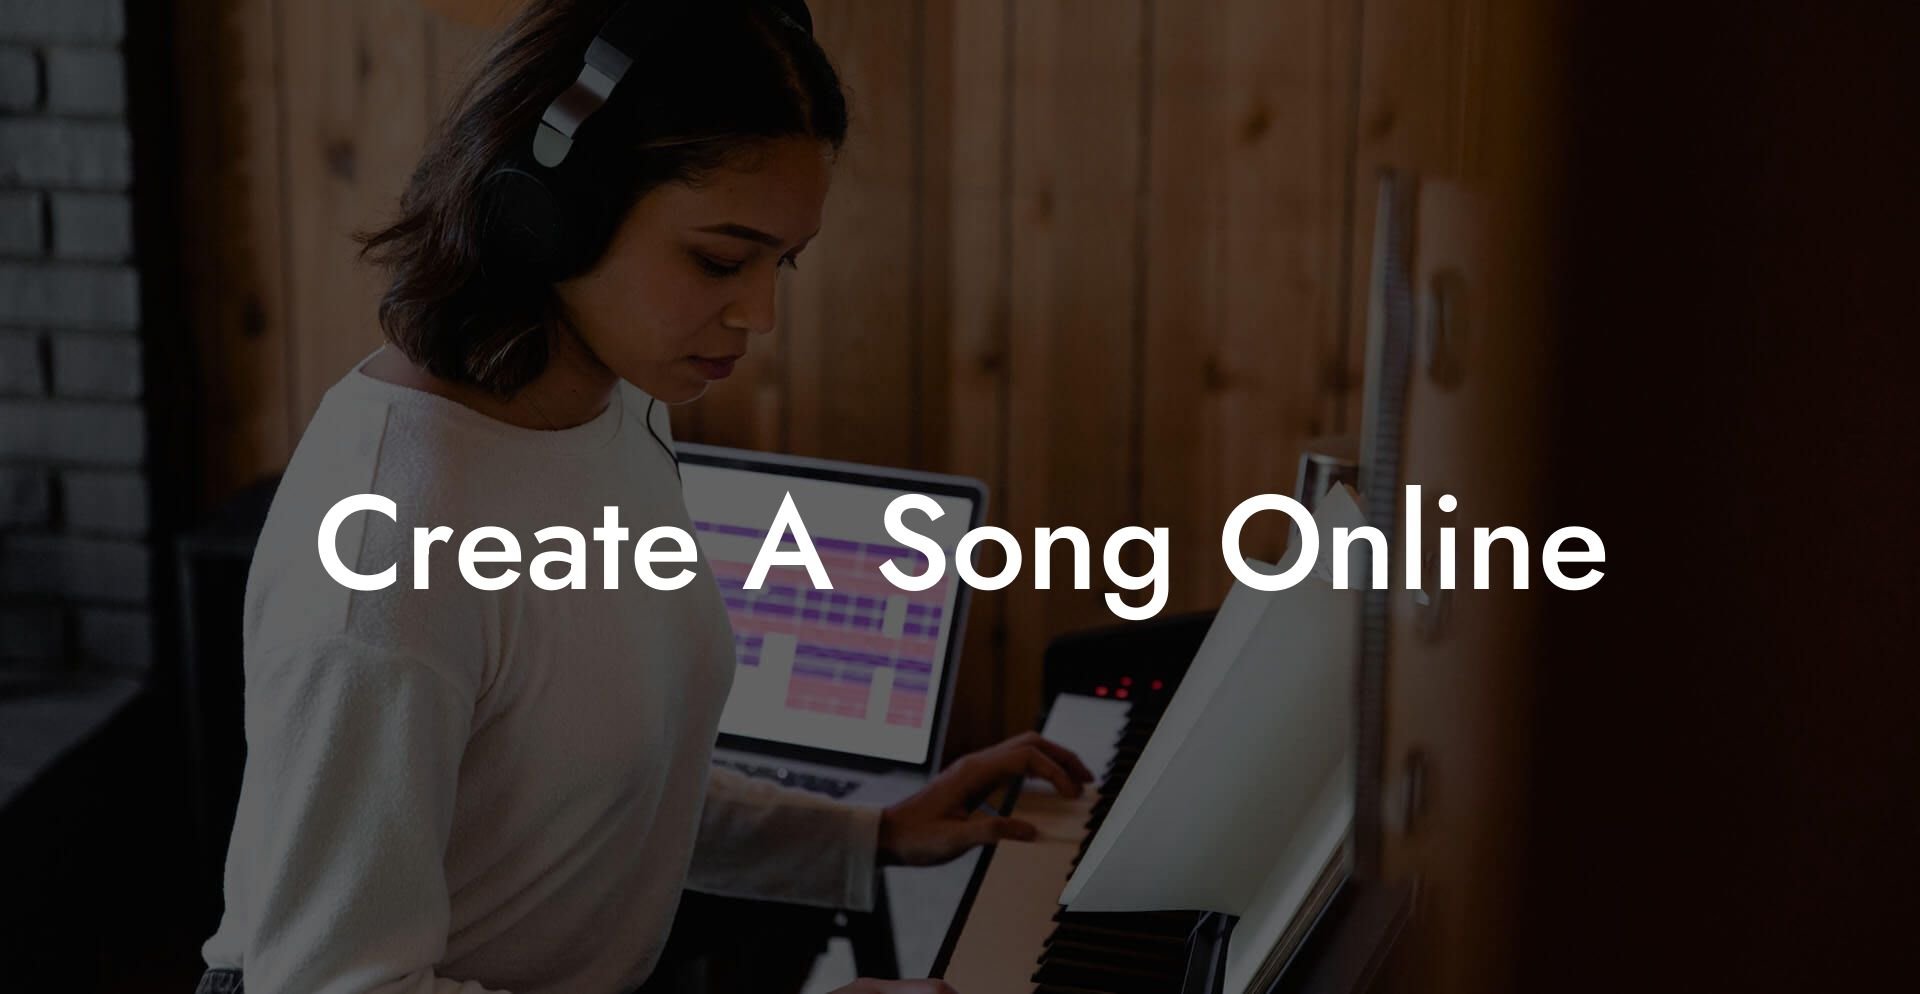 create a song online lyric assistant